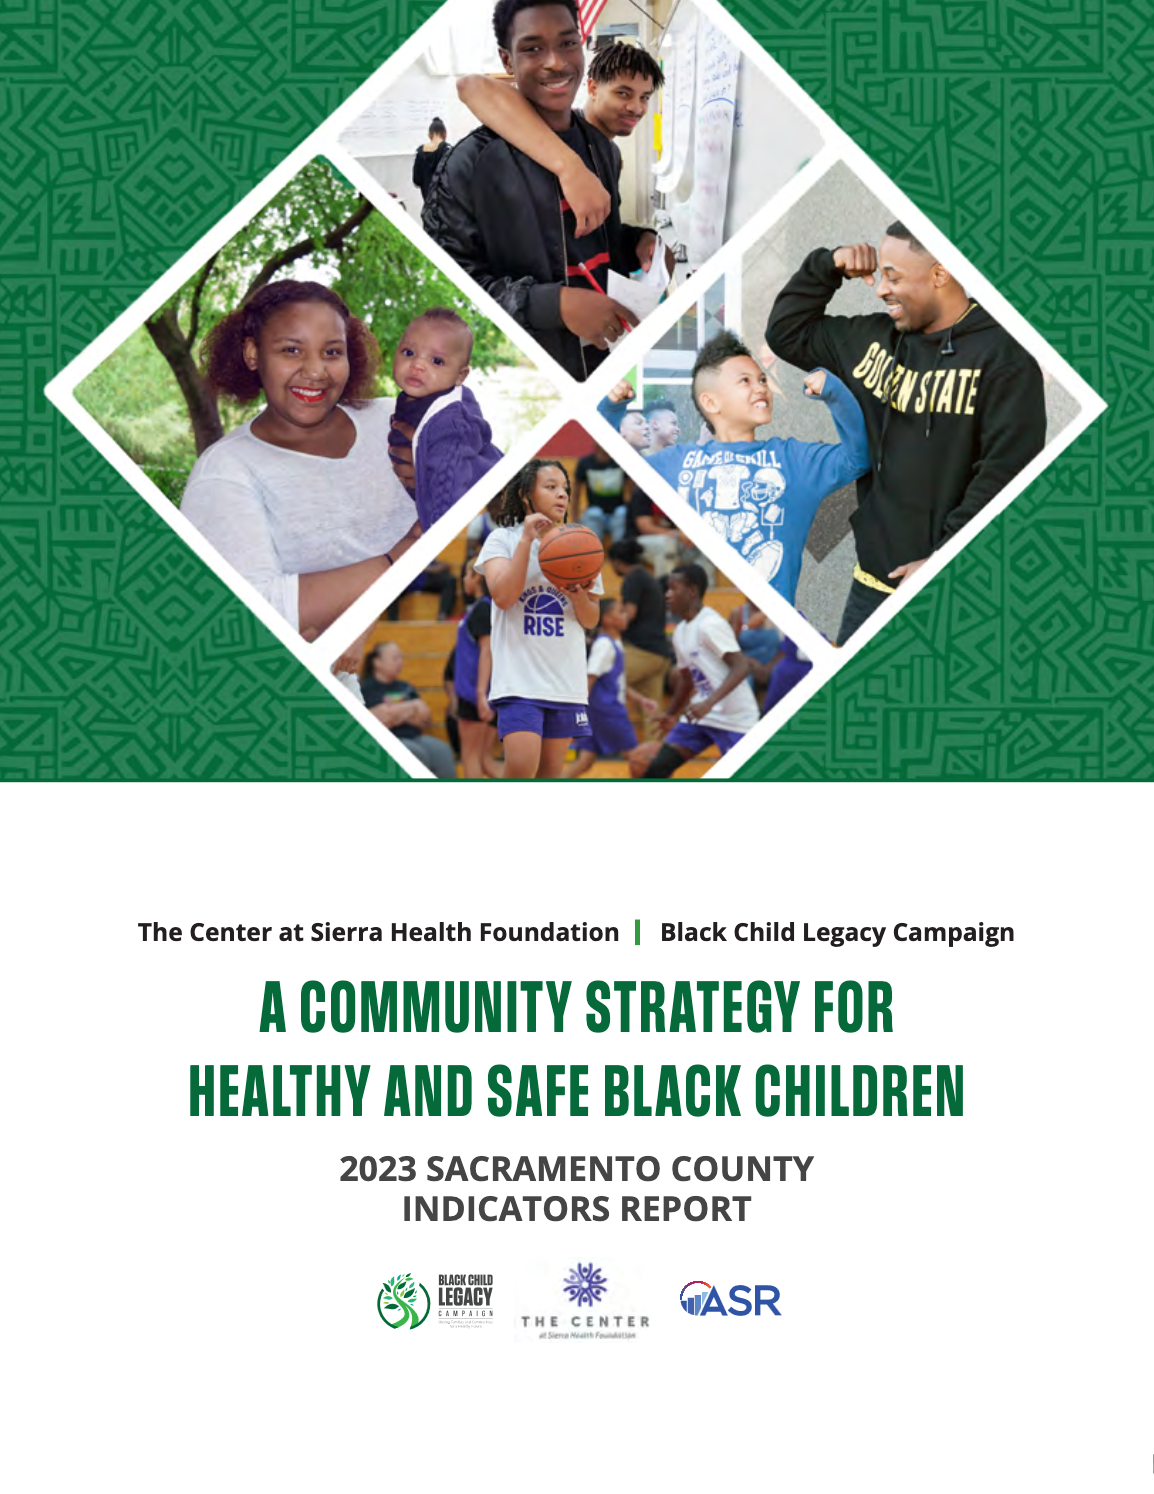 Pictured: Cover of A Community Strategy for Healthy and Safe Black Children, 2023 Sacramento County Indicators Report